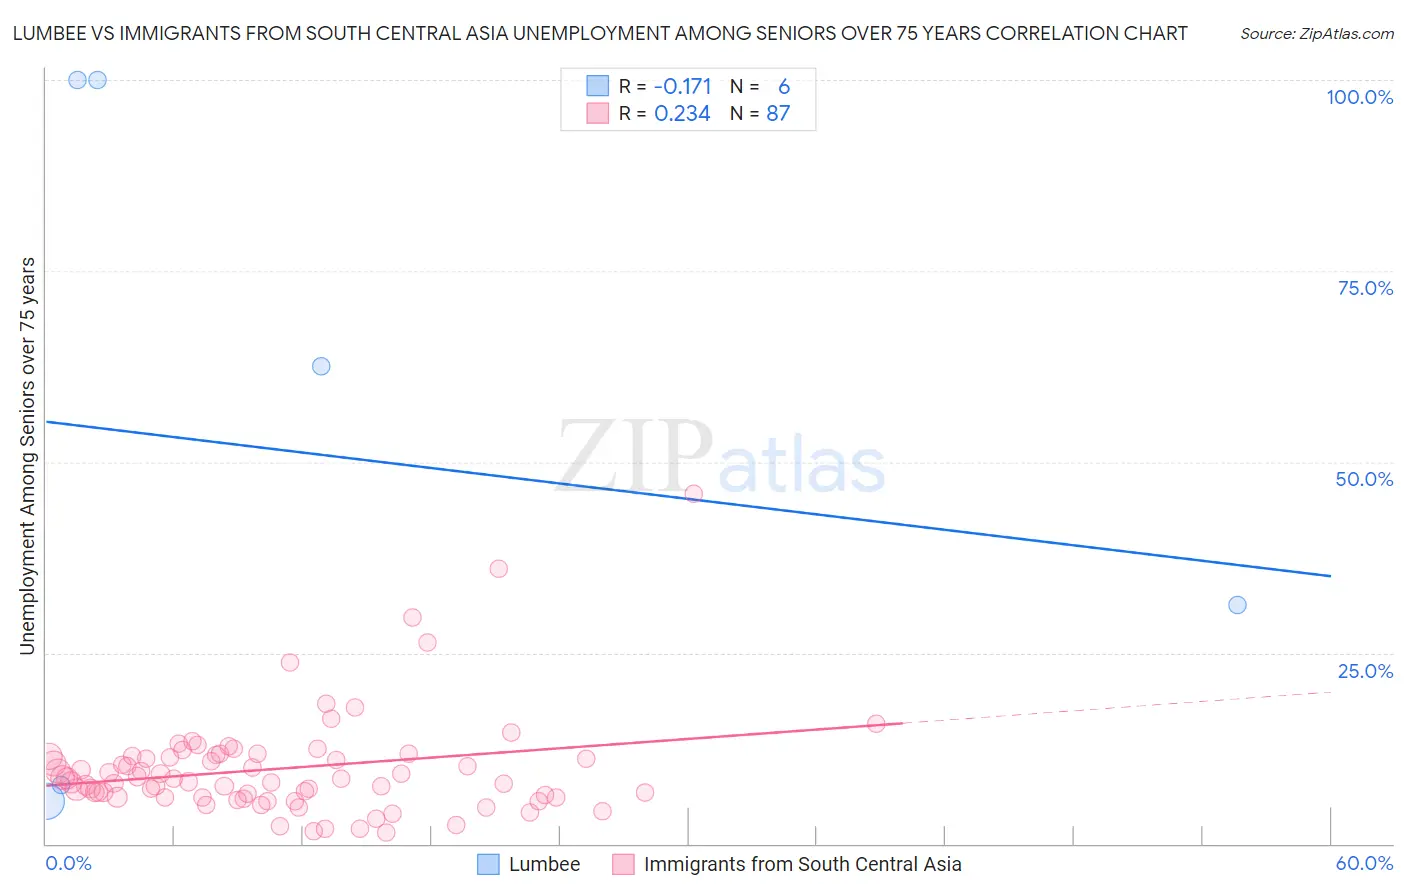 Lumbee vs Immigrants from South Central Asia Unemployment Among Seniors over 75 years